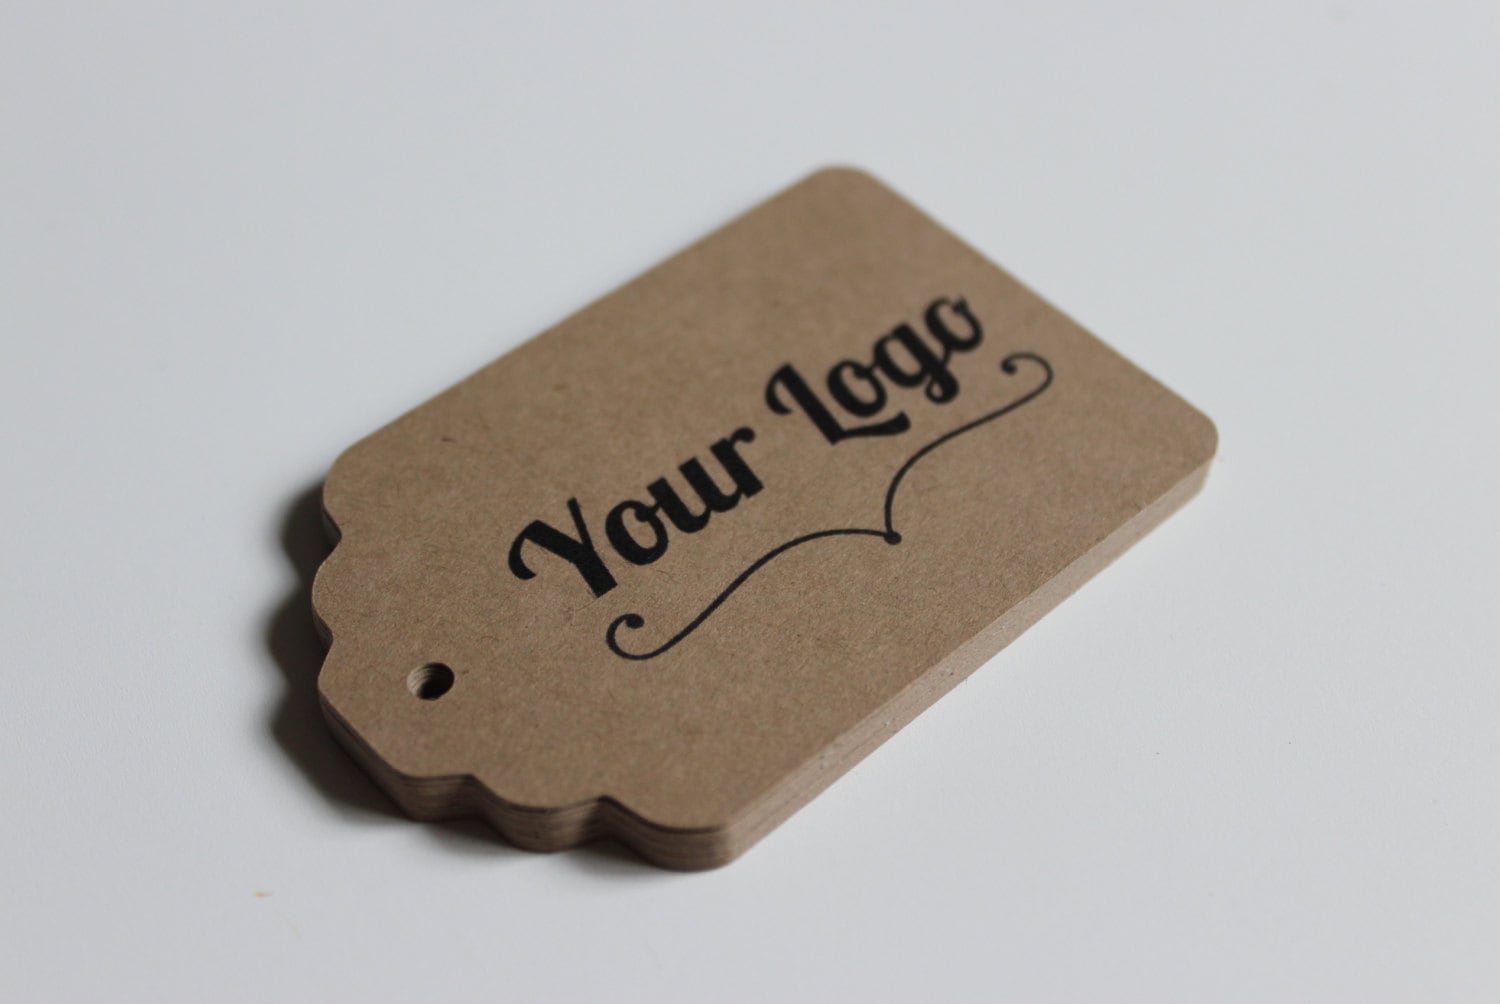 China Custom Leather Tags for Crochet Suppliers, Manufacturers, Factory -  Wholesale Price - KUNSHUO